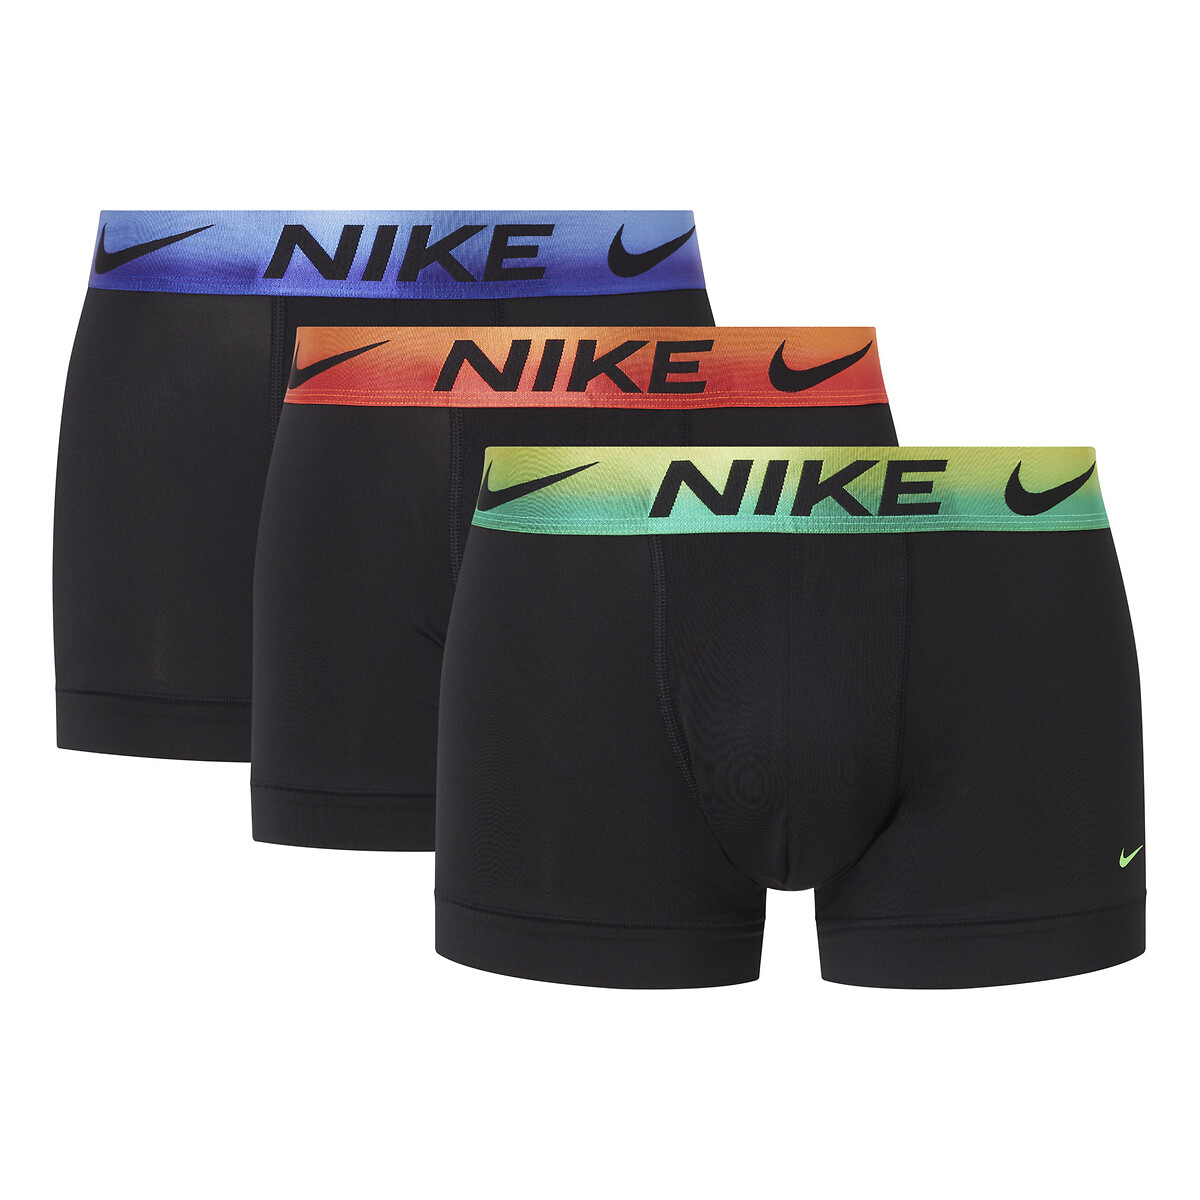 Pack of 3 dri fit recycled plain hipsters Nike | La Redoute